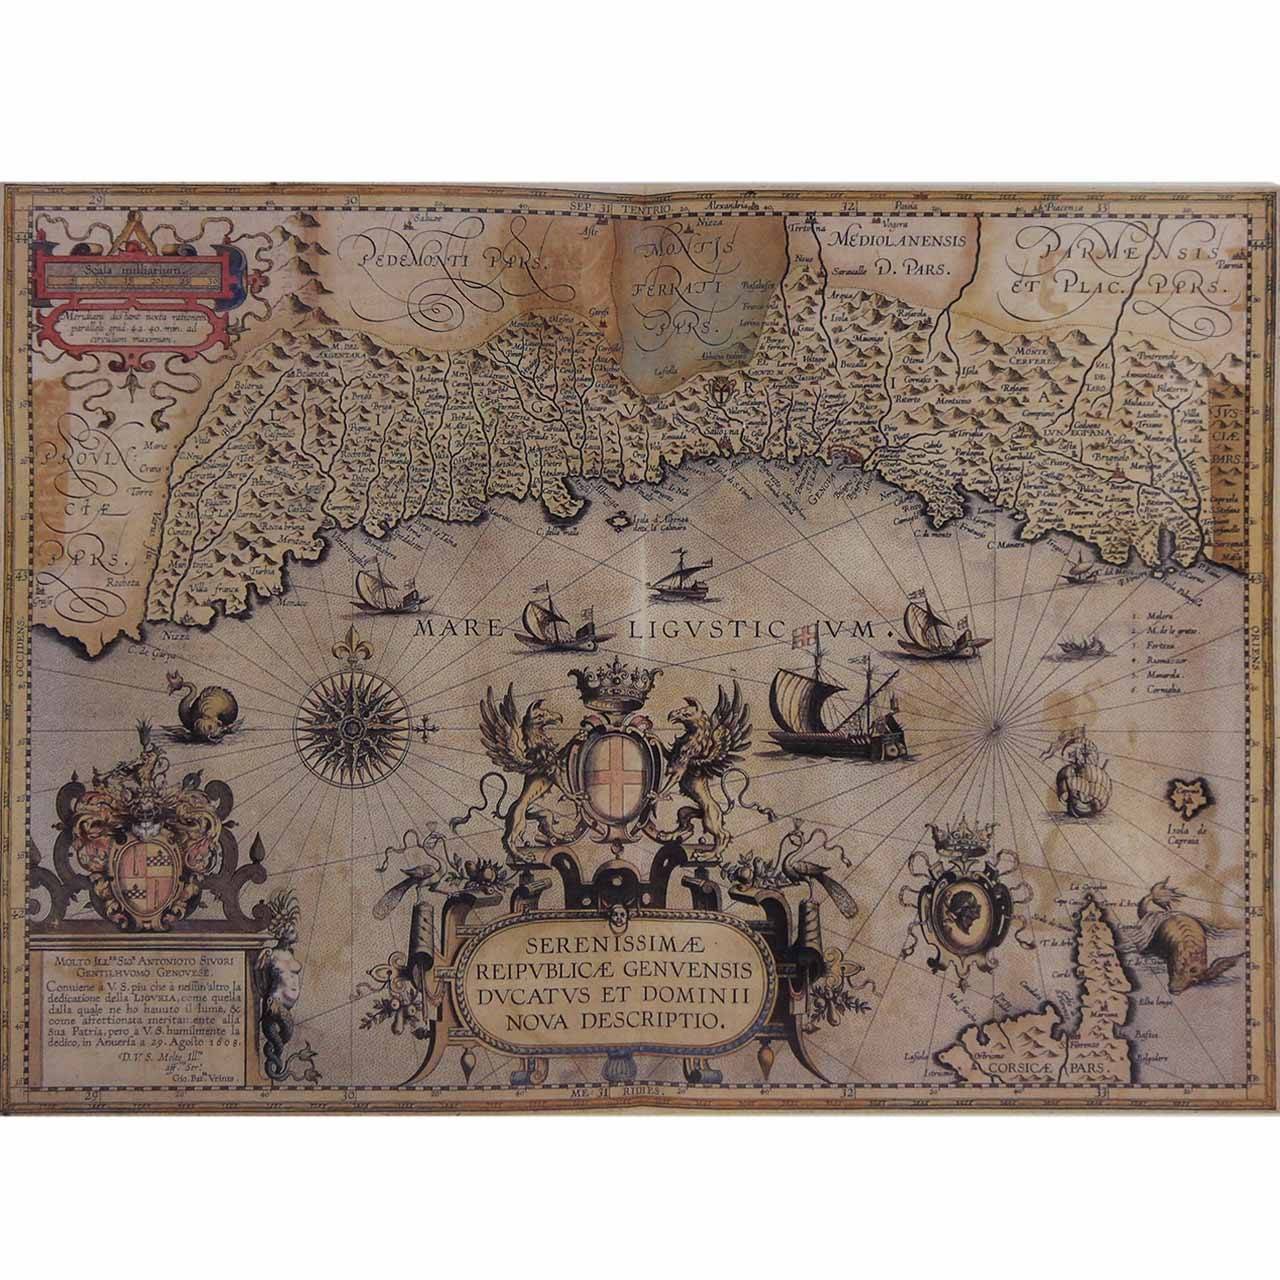 American Grouping of Six Prints Featuring Antique Maps by Abraham Ortelius